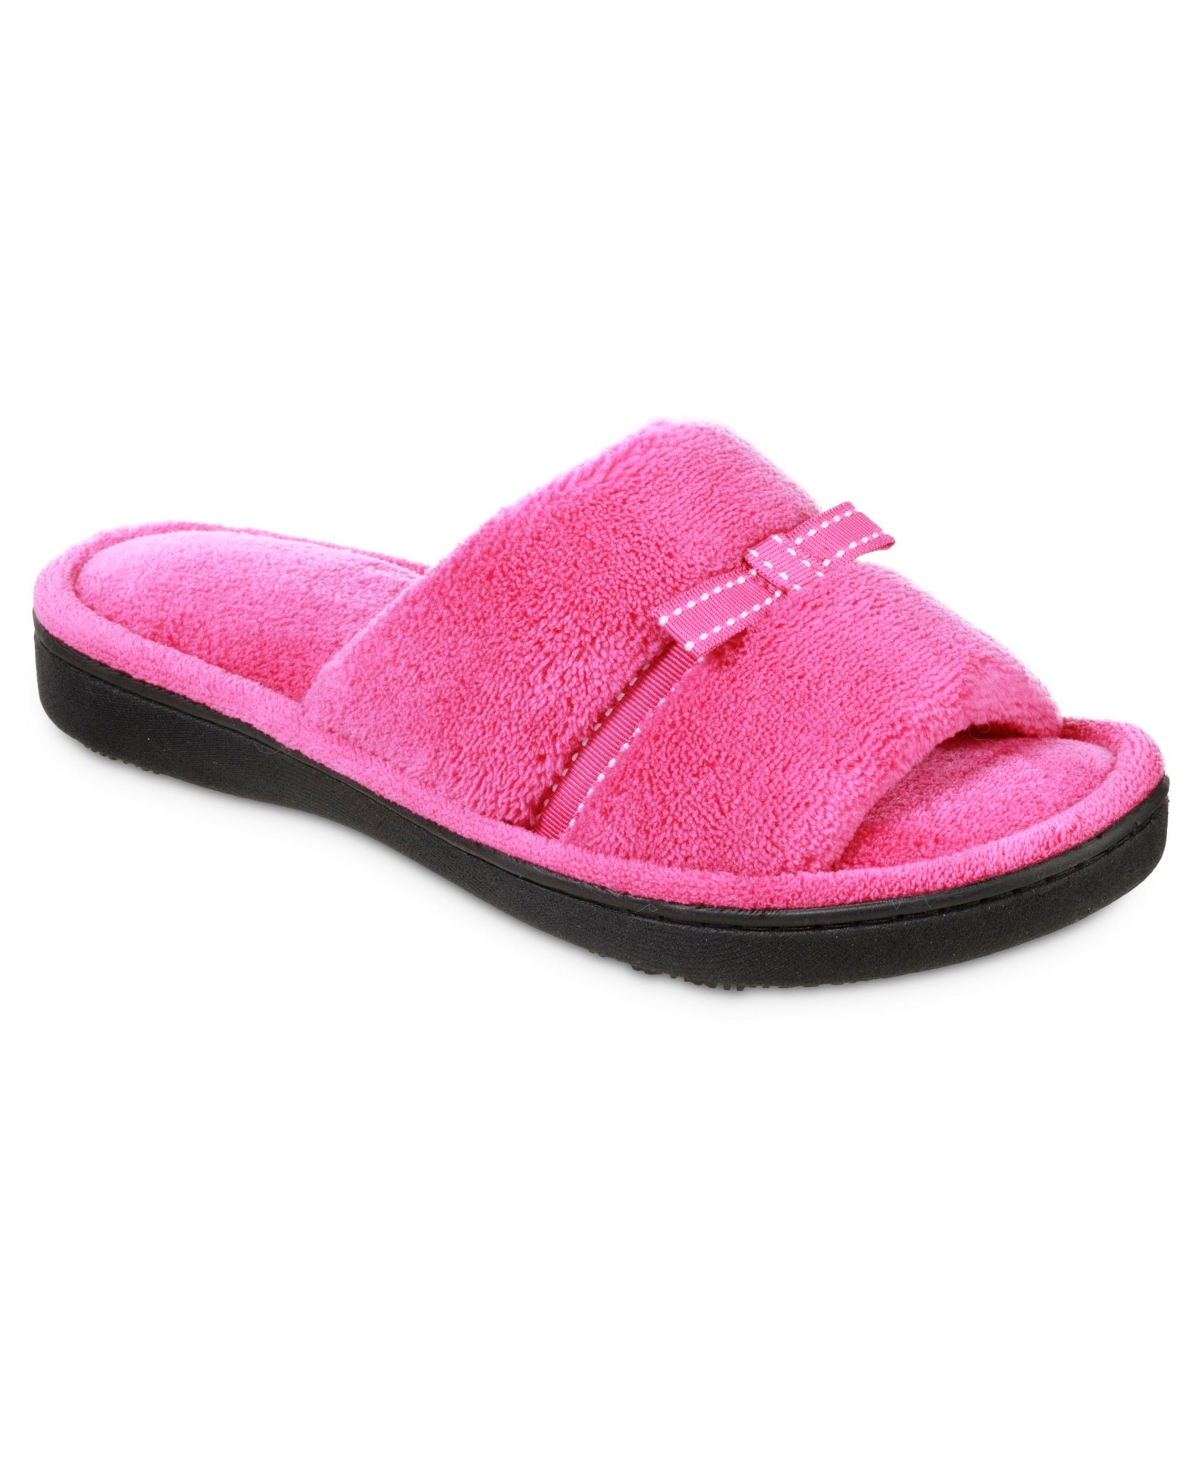 Isotoner Women's Microterry Milly Slide Slipper - Pink